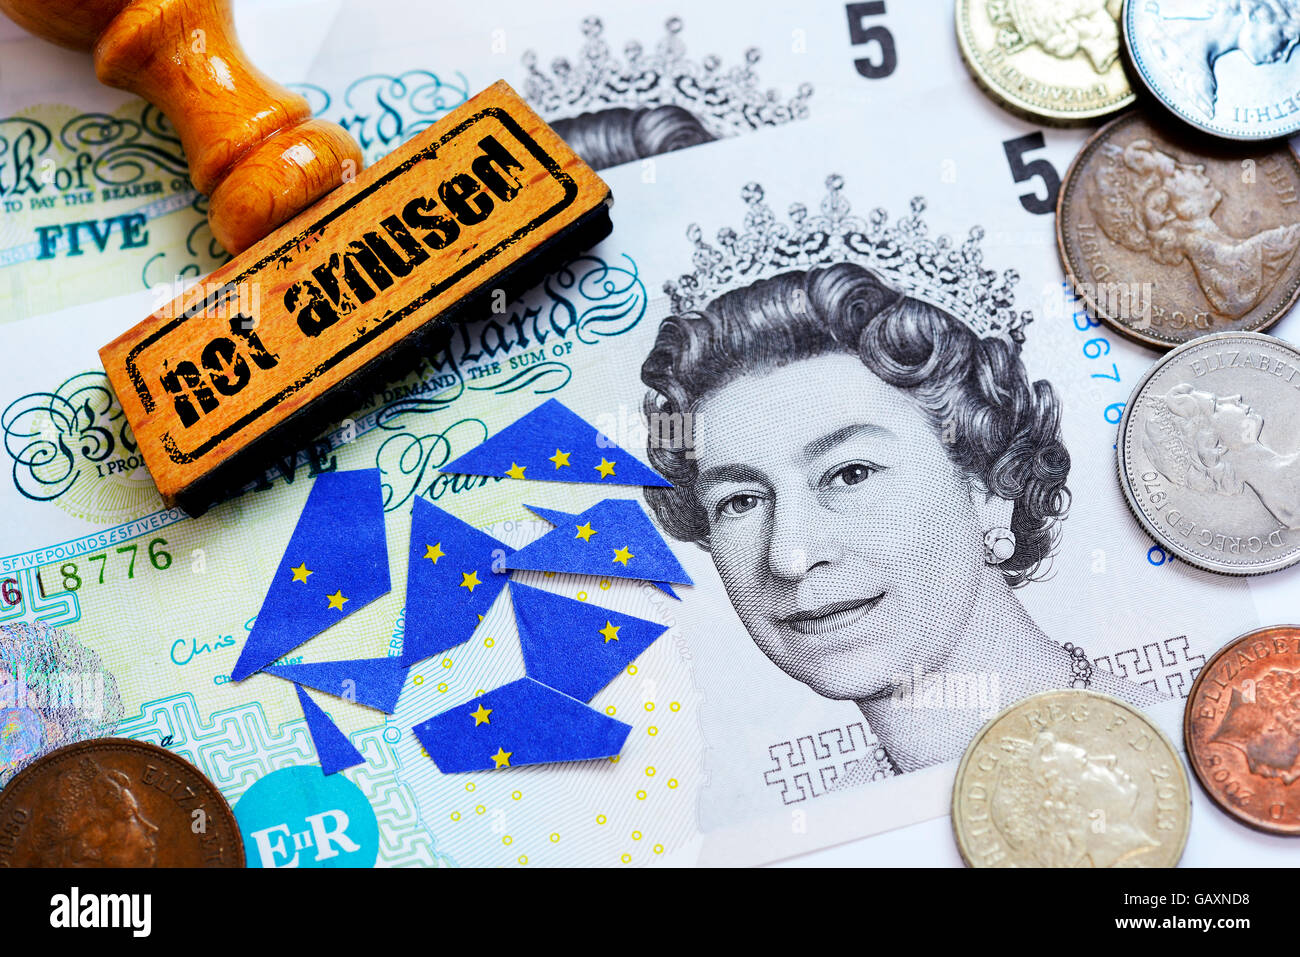 Pound notes and coins, not amused stamp and torn EU flag Stock Photo